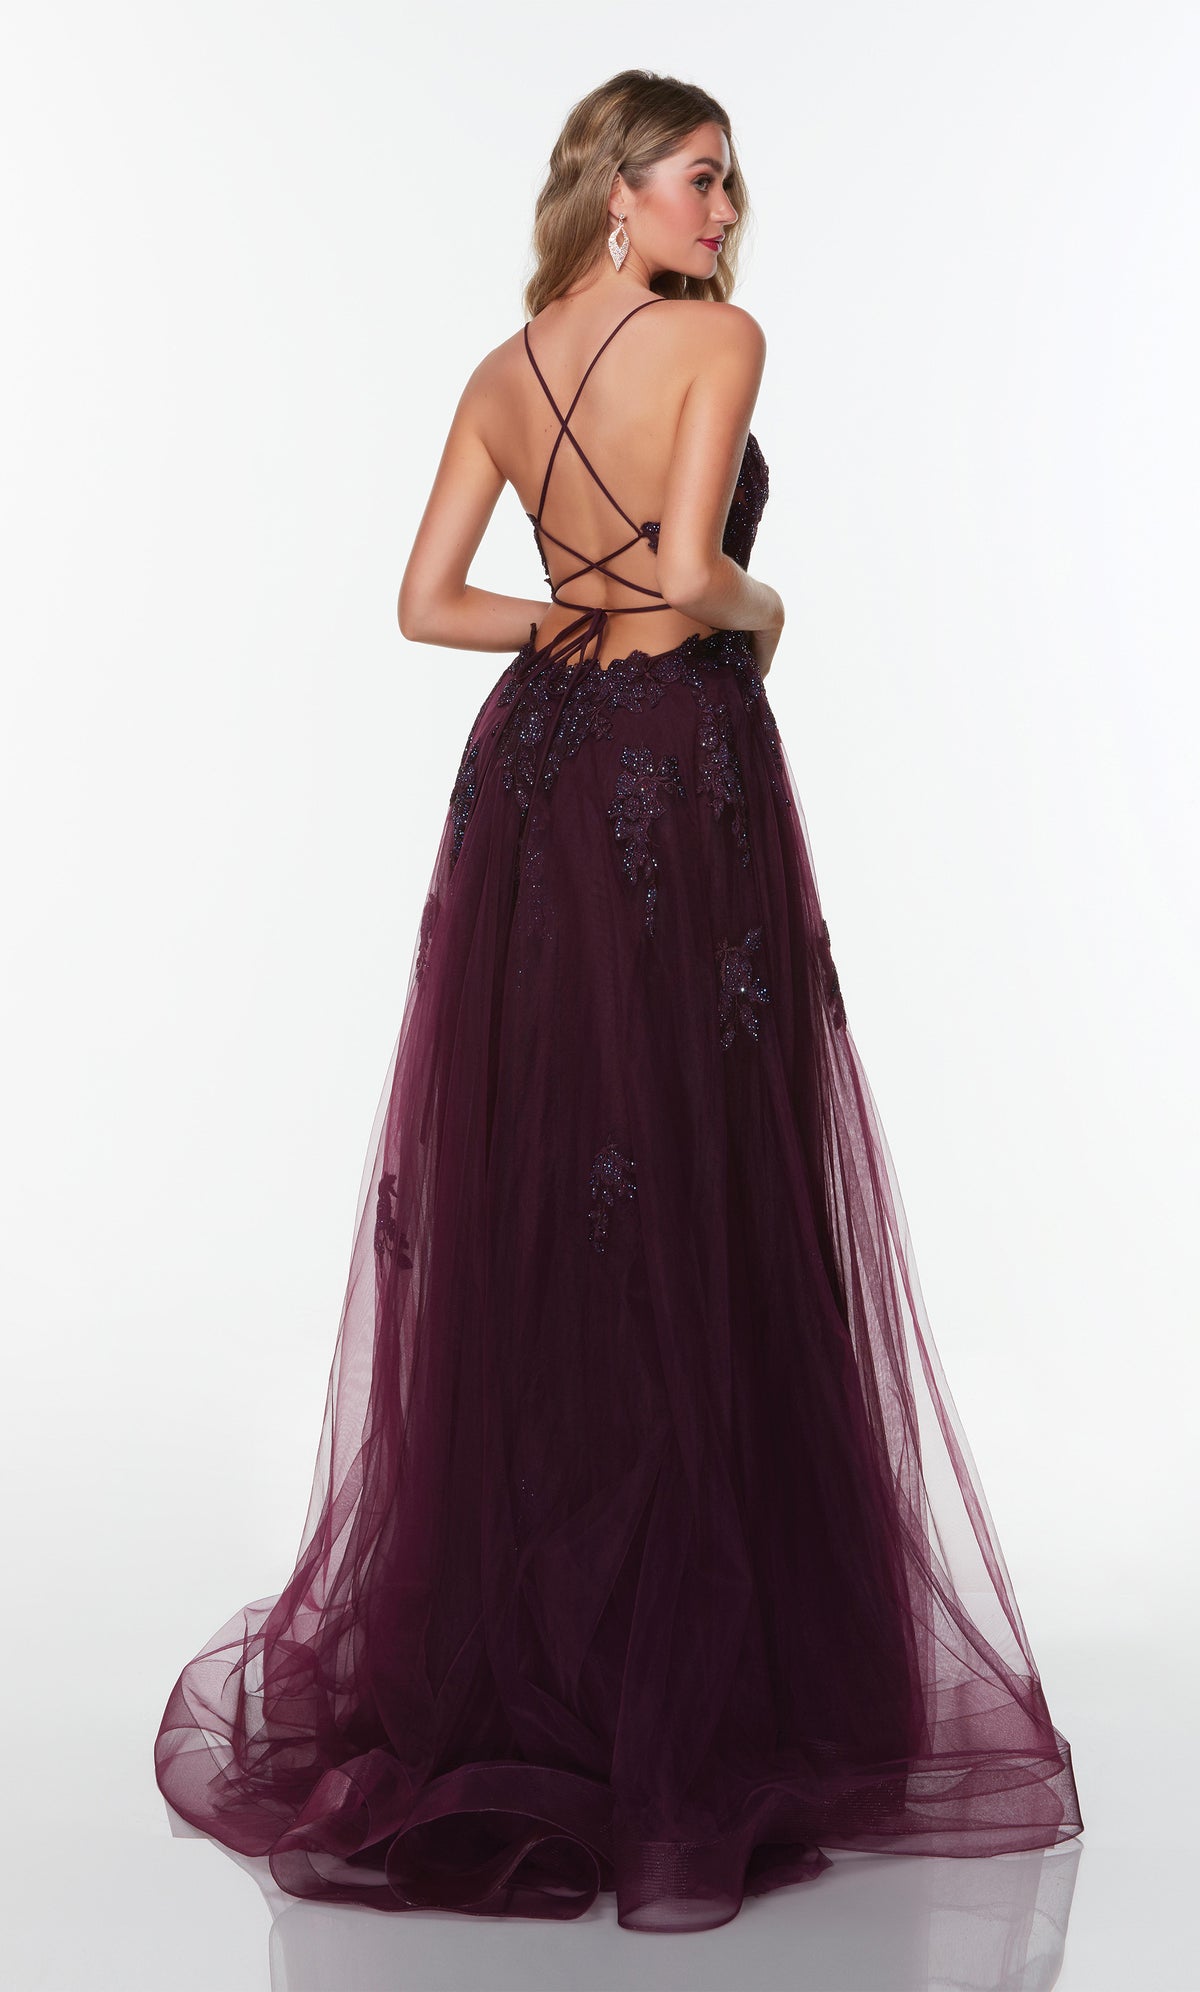 Tulle prom dress with a strappy back, floral appliques, and train in black plum.